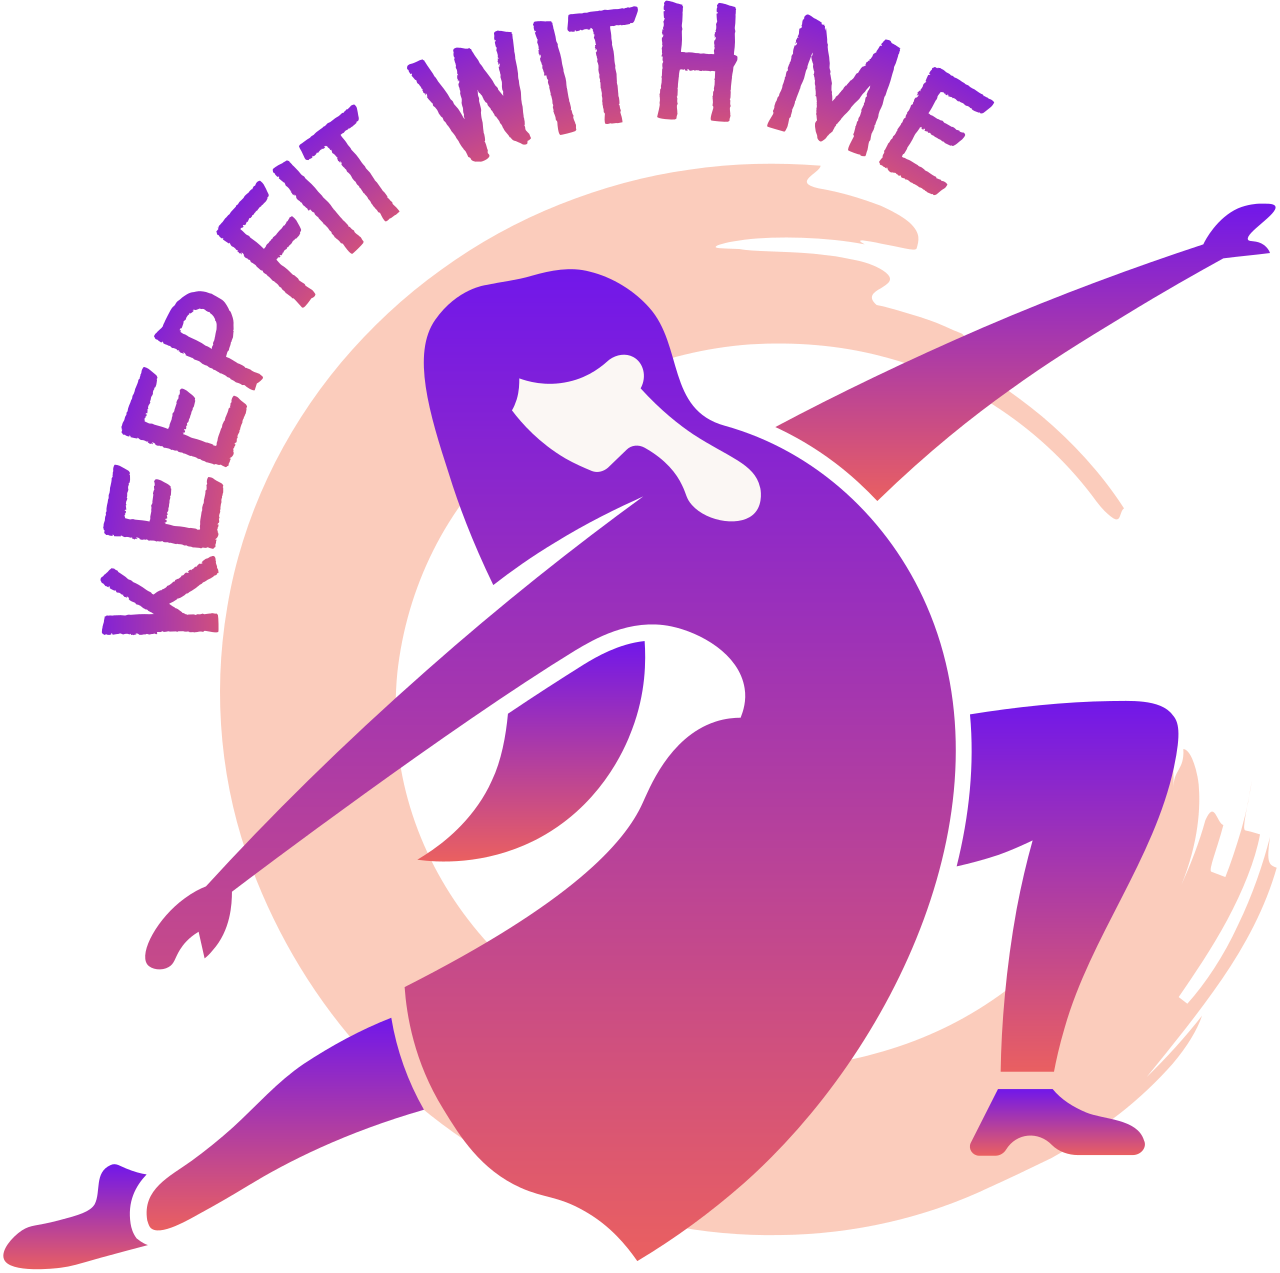 KEEP FIT WITH ME's web page